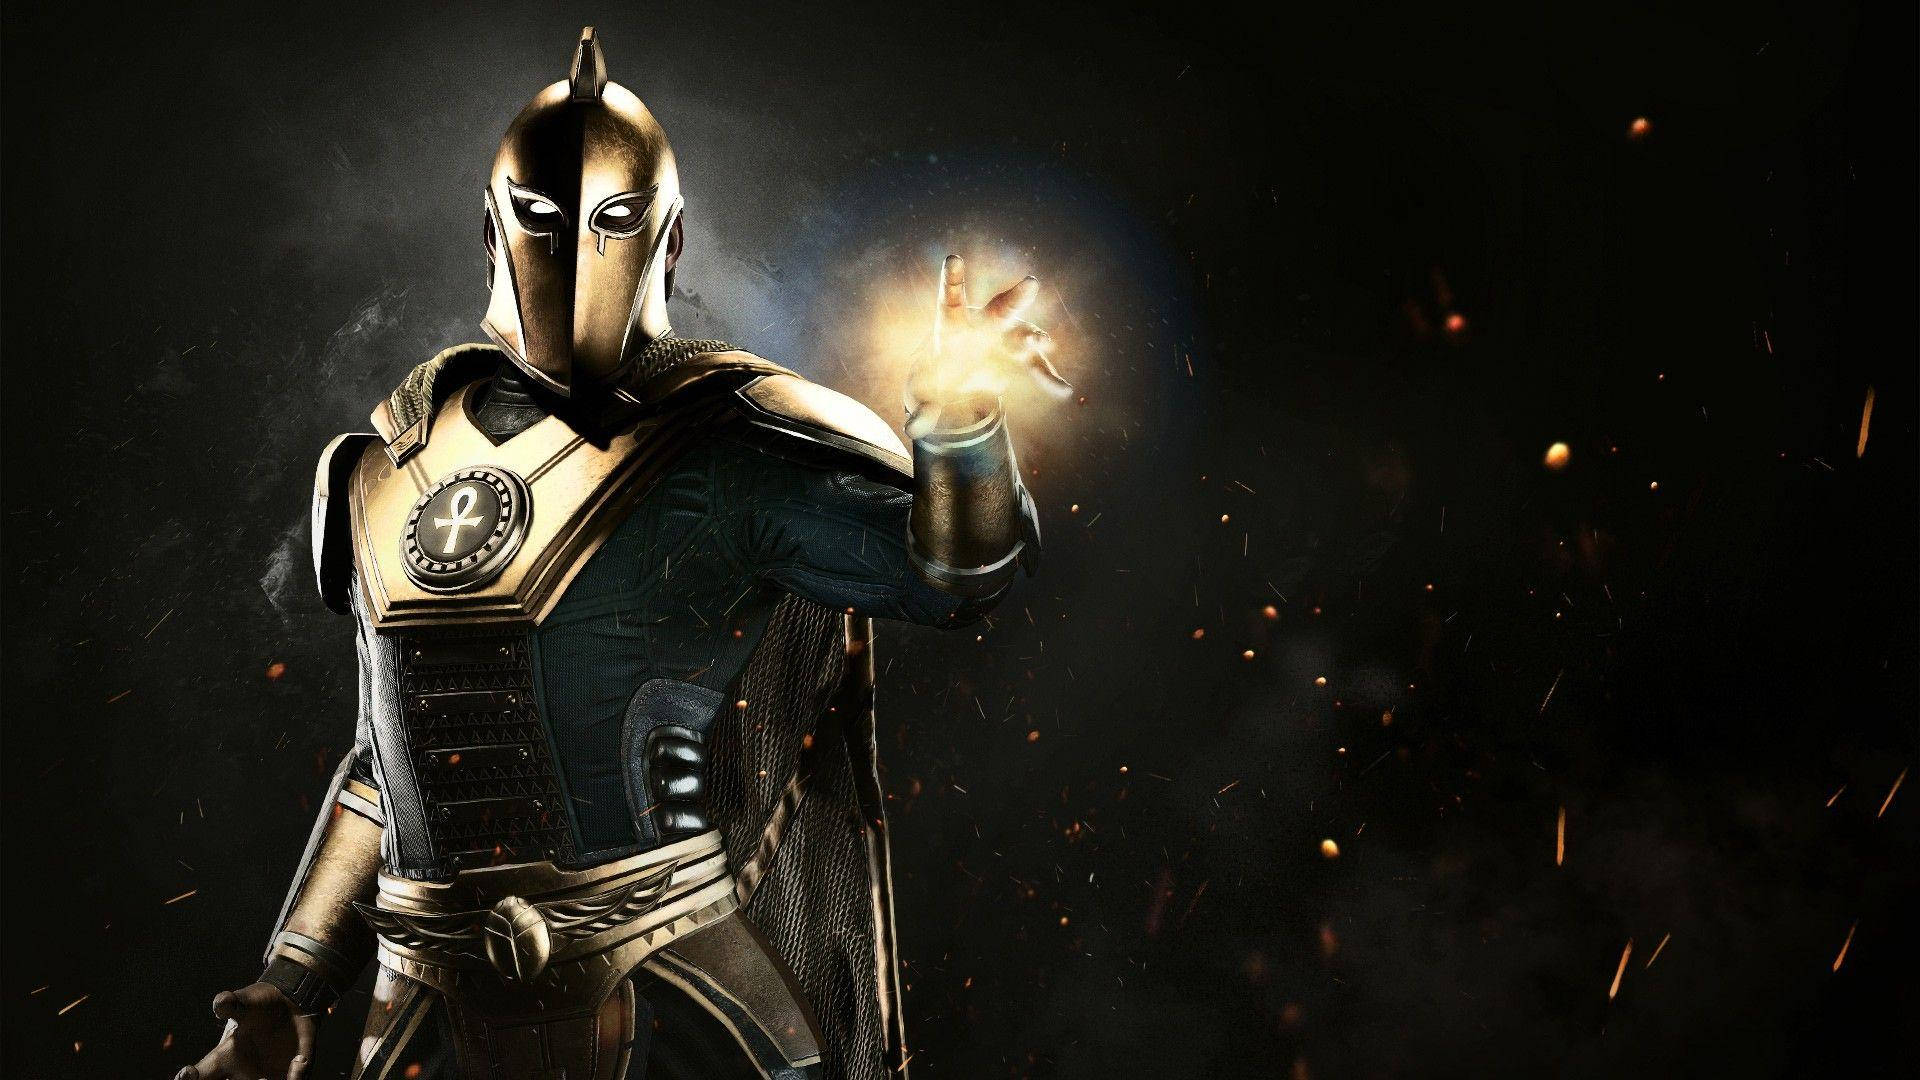 Doctor Fate Of Injustice 2 Background